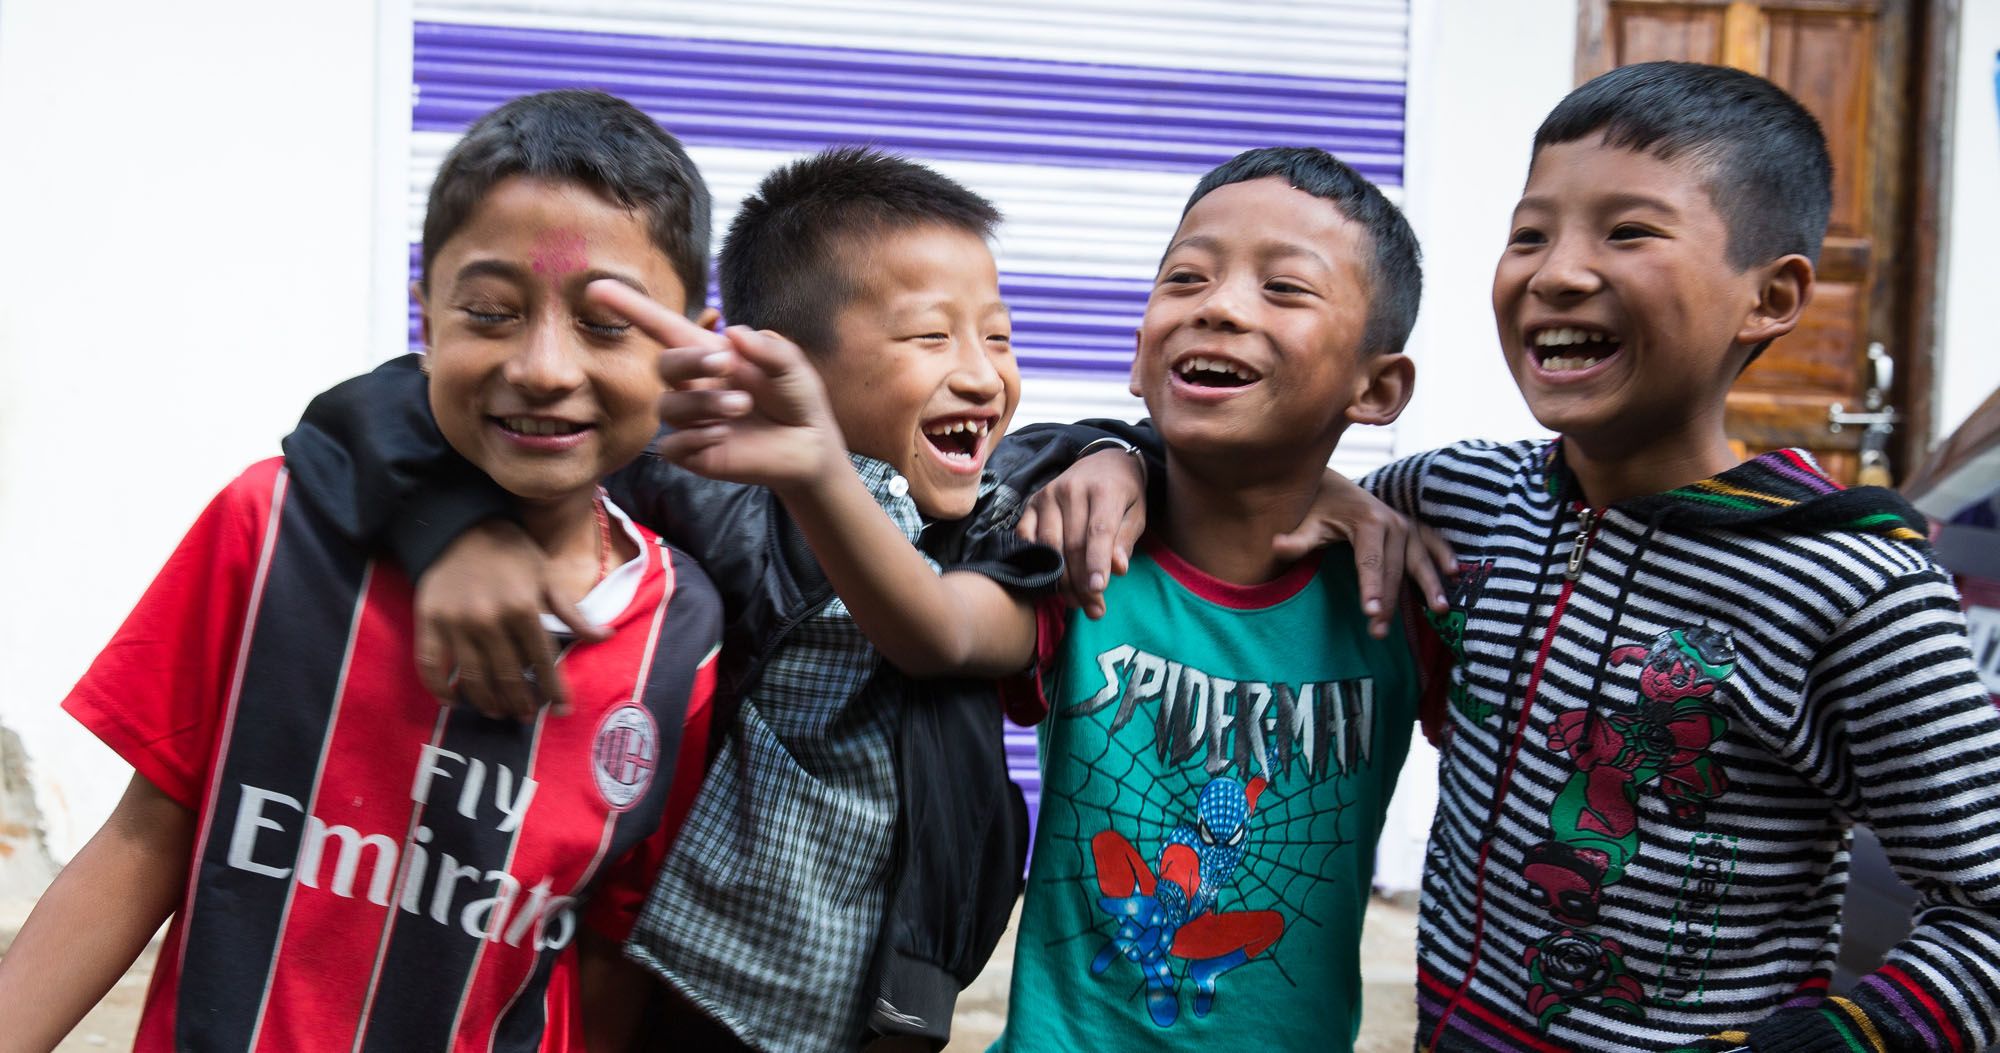 Featured image for “Happy Diwali from Darjeeling, India”